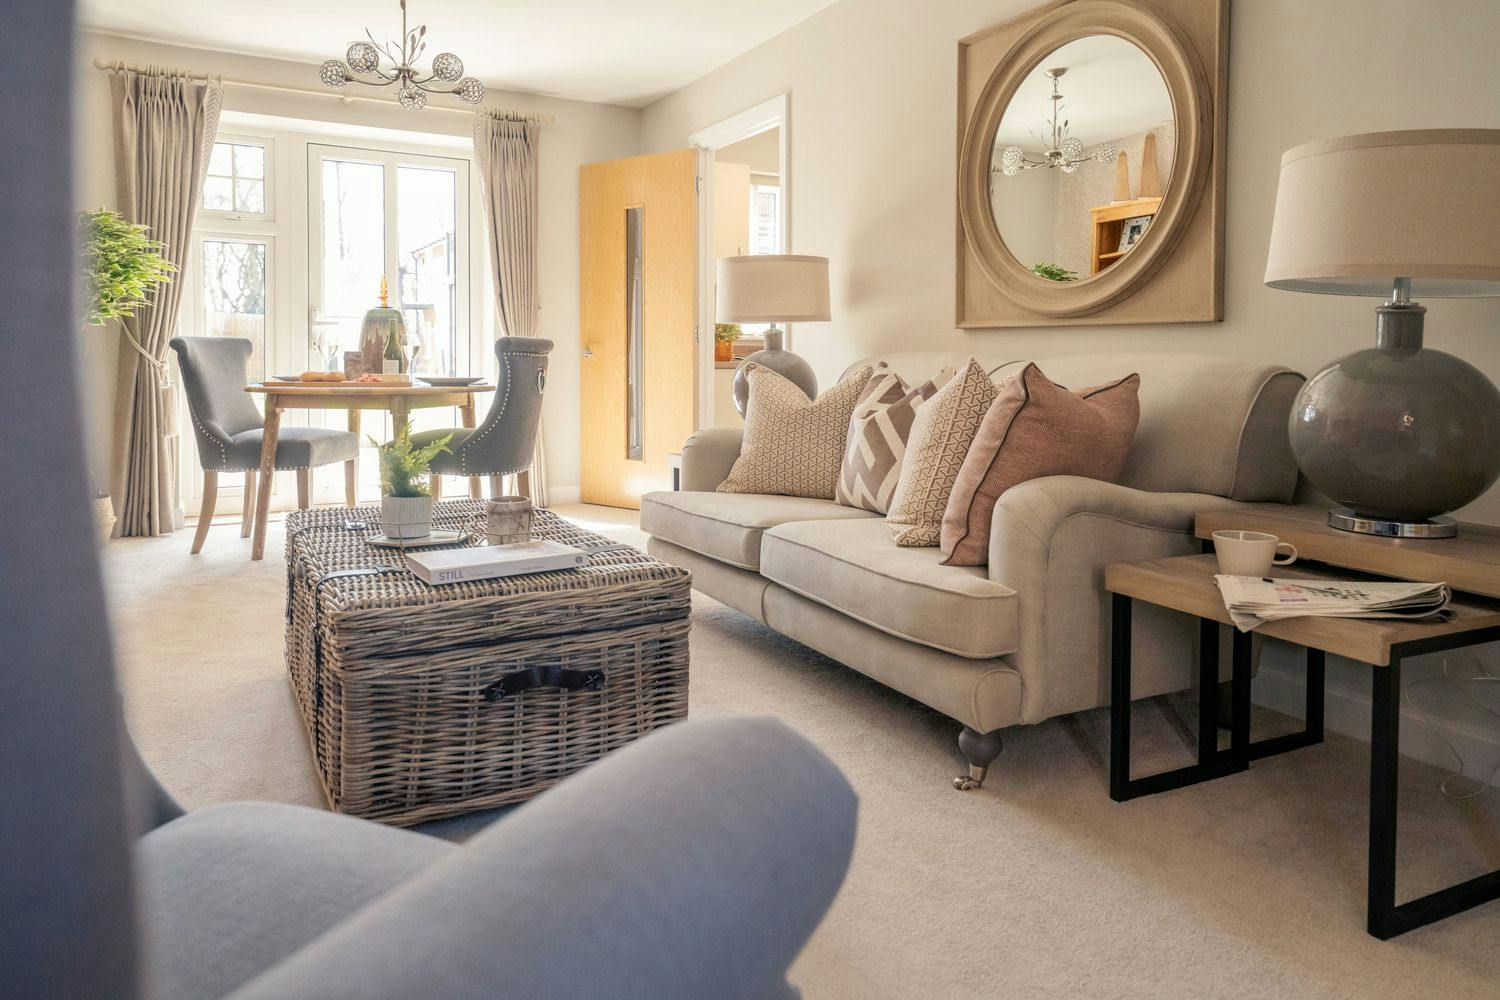 Living Room at Roswell Court Retirement Development in Exmouth, Devon